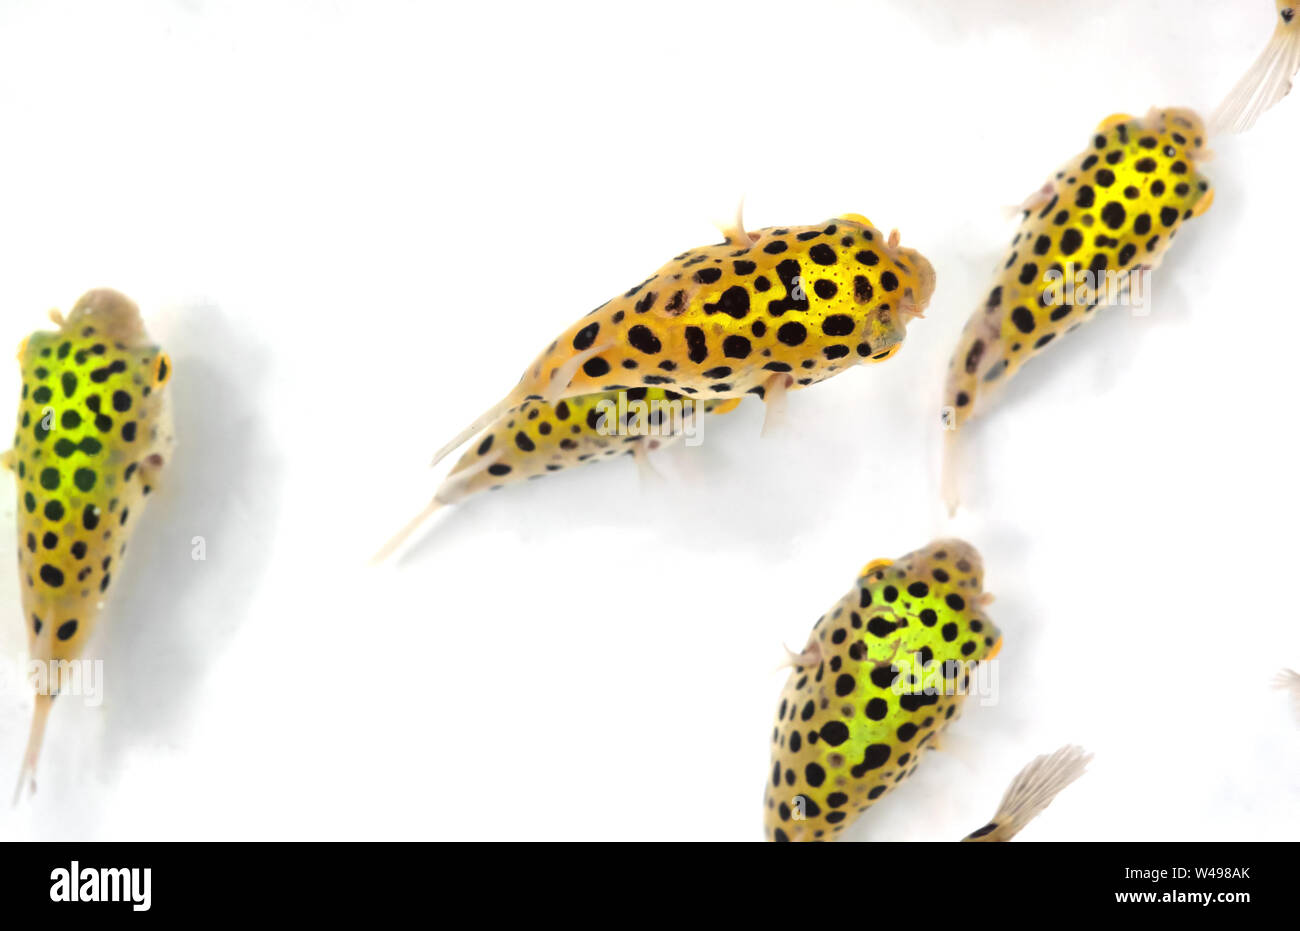 Closeup Group of Green Spotted Puffer Fish Isolated on White Background Stock Photo